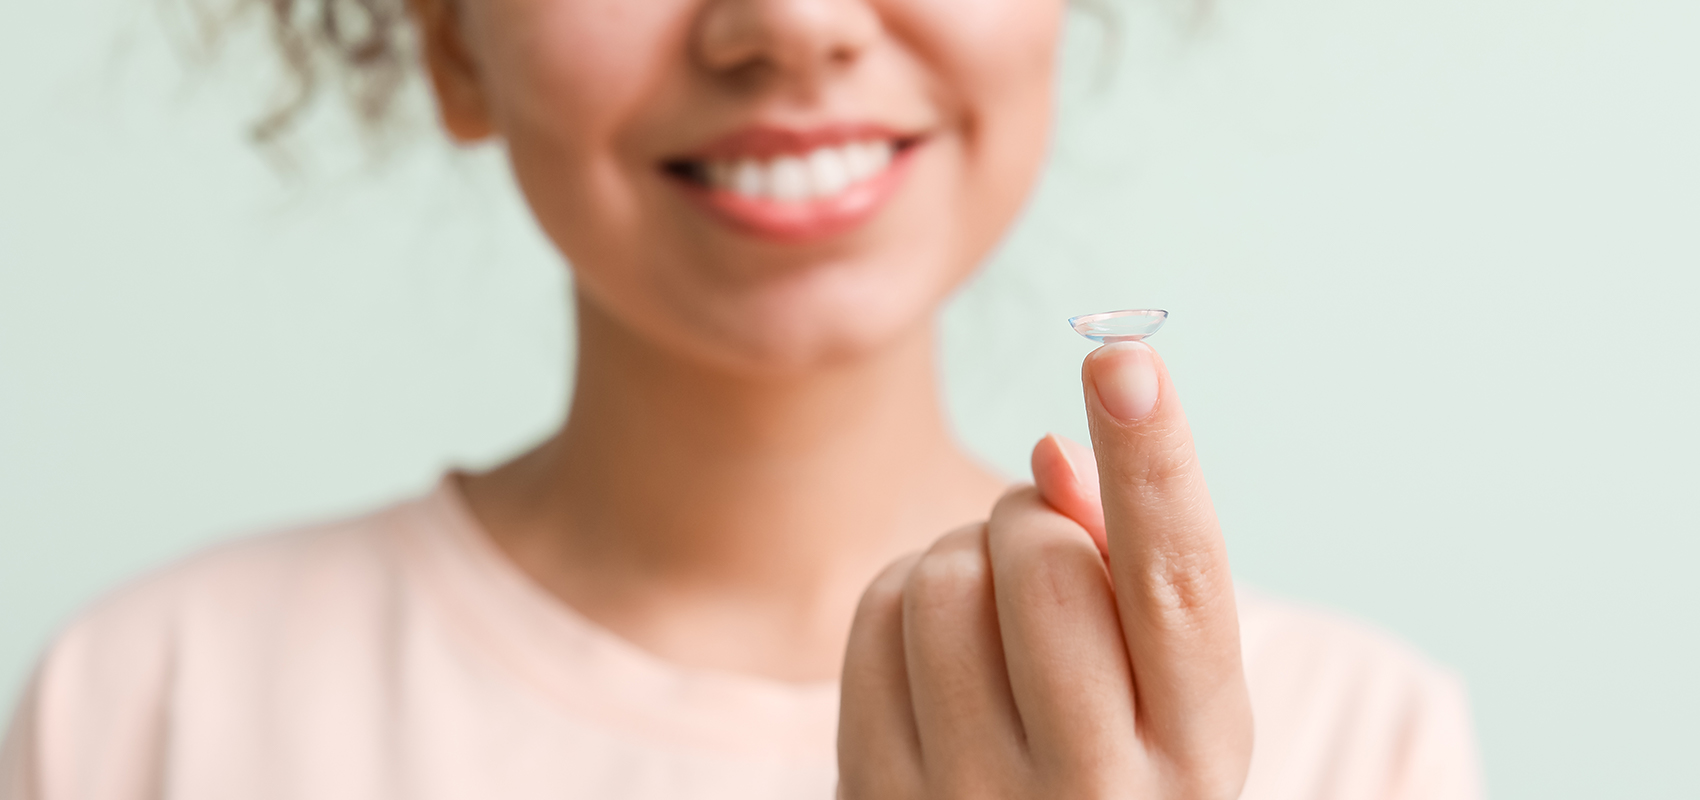 The first choice treatment for dry eye associated with the use of contact lens involves the constant application of lubricating artificial tears.